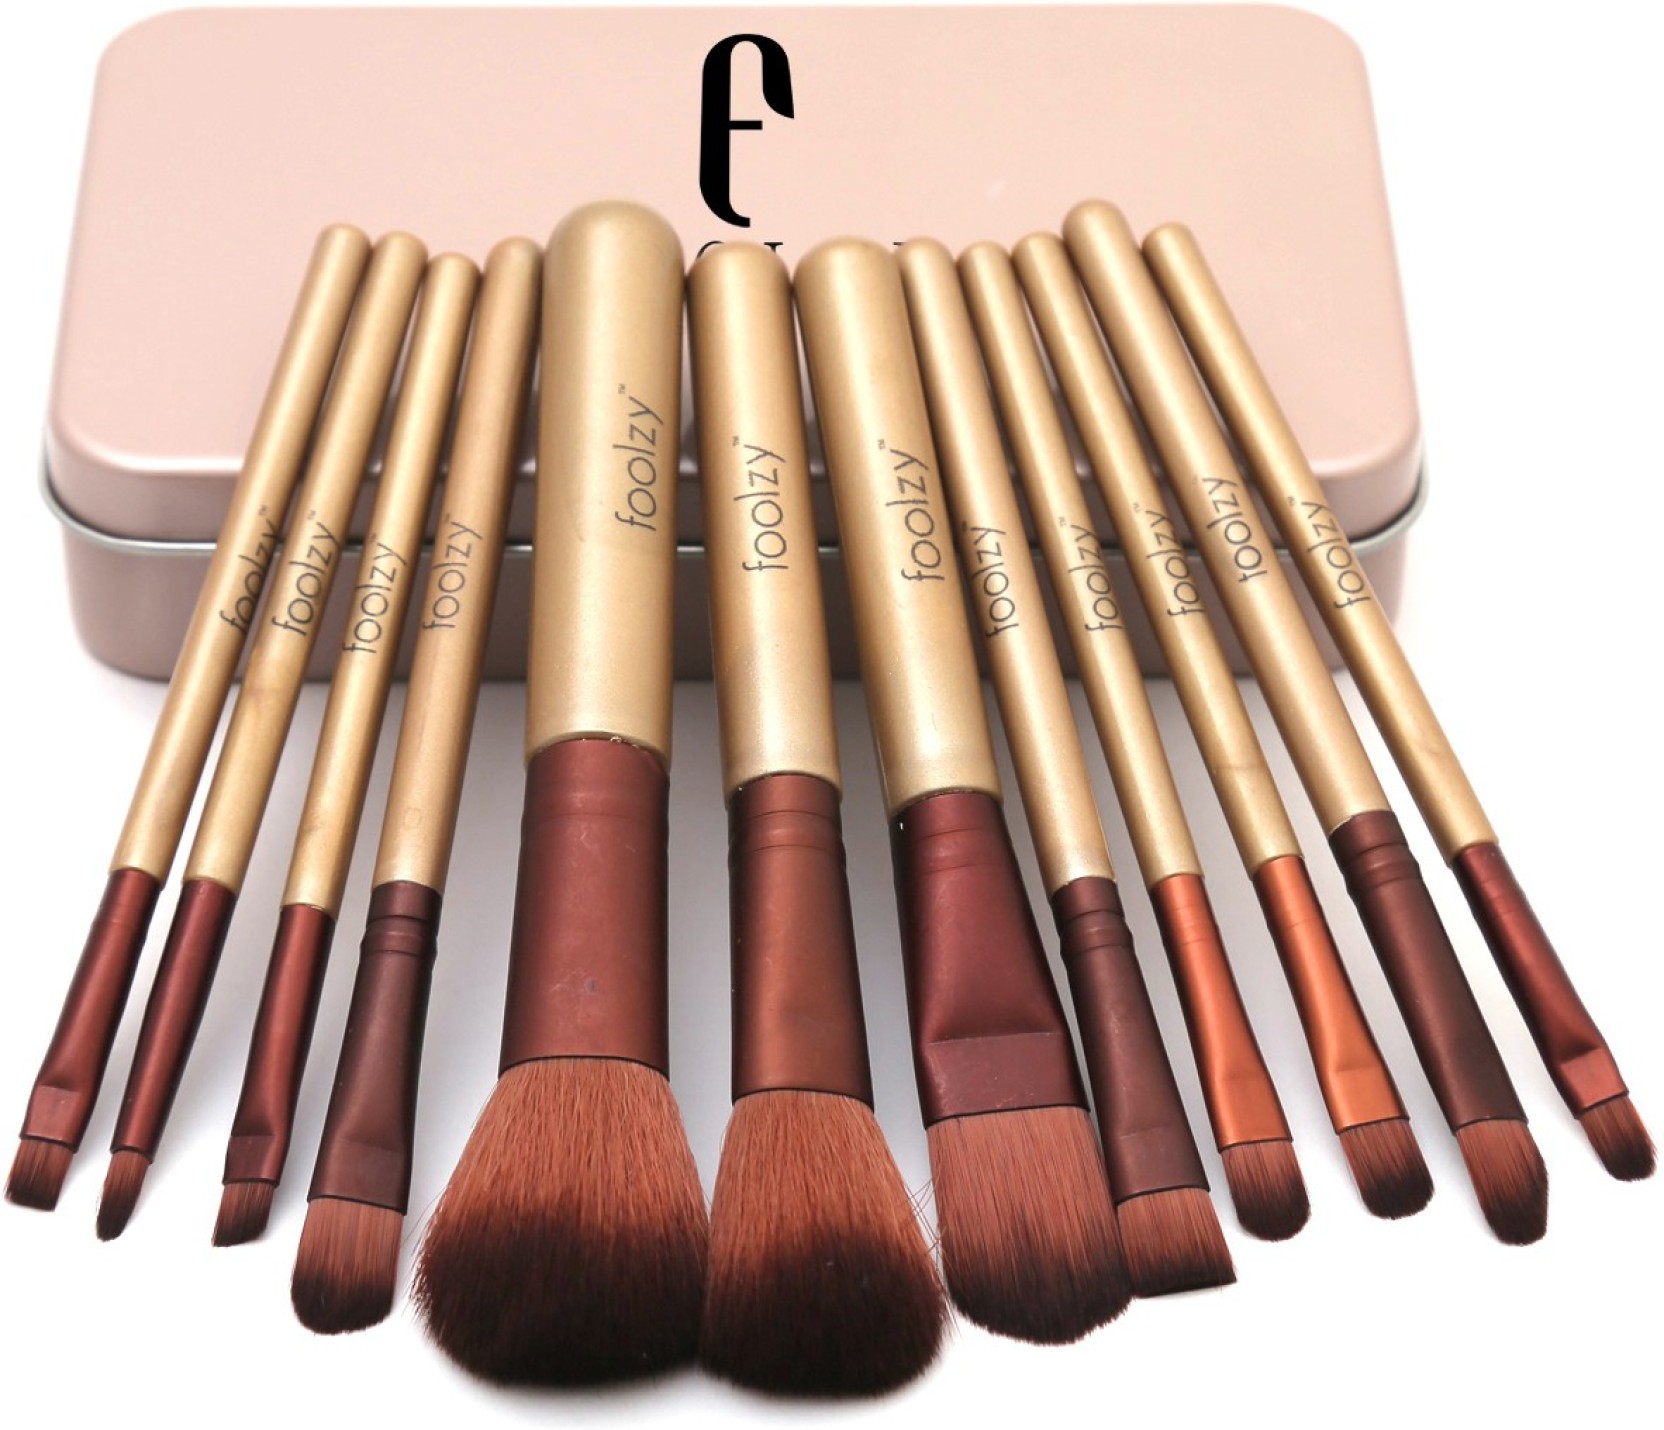 Mail airer brushes online india makeup nigeria